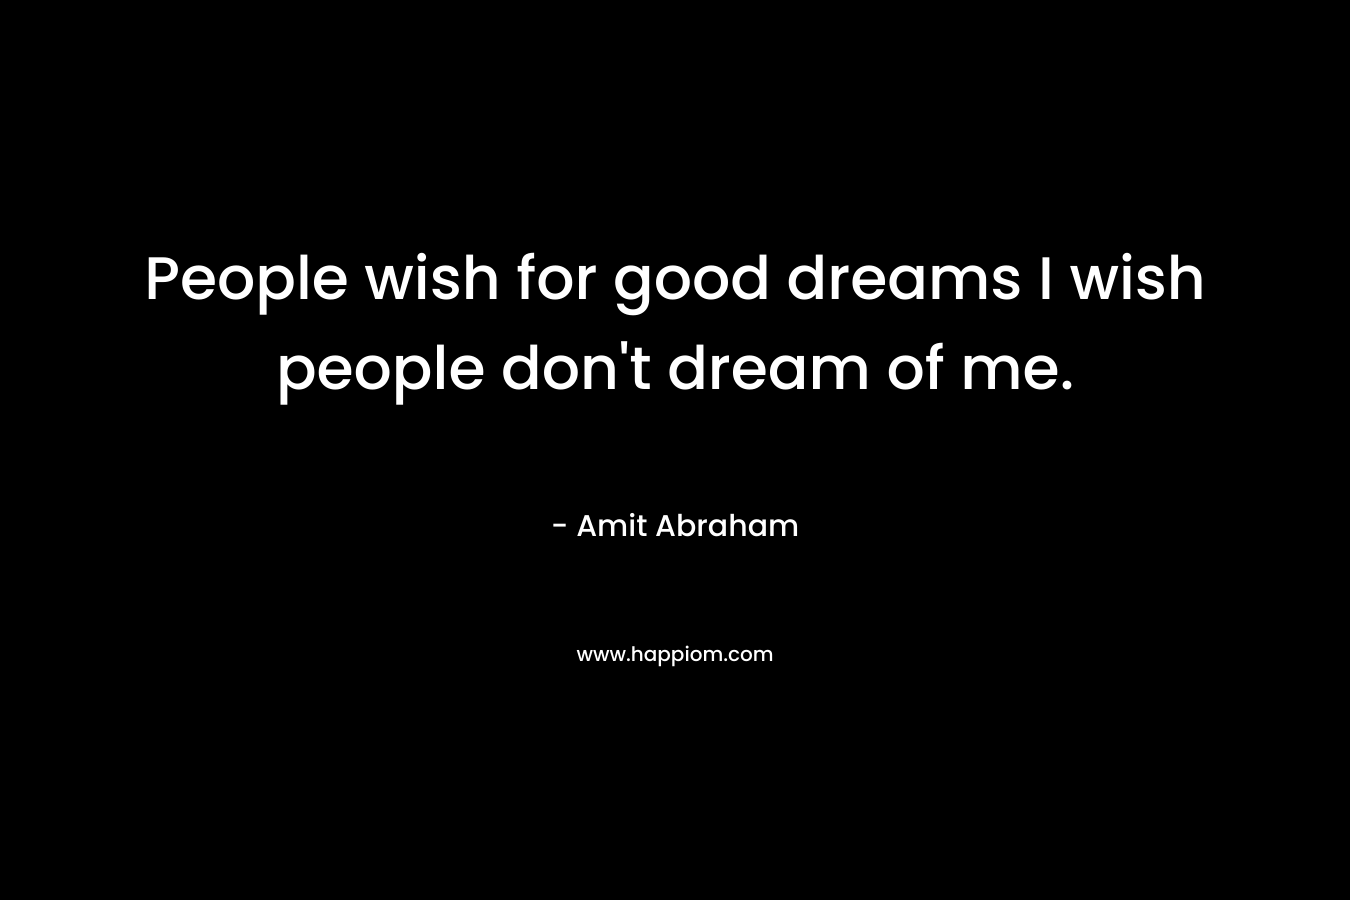 People wish for good dreams I wish people don't dream of me.